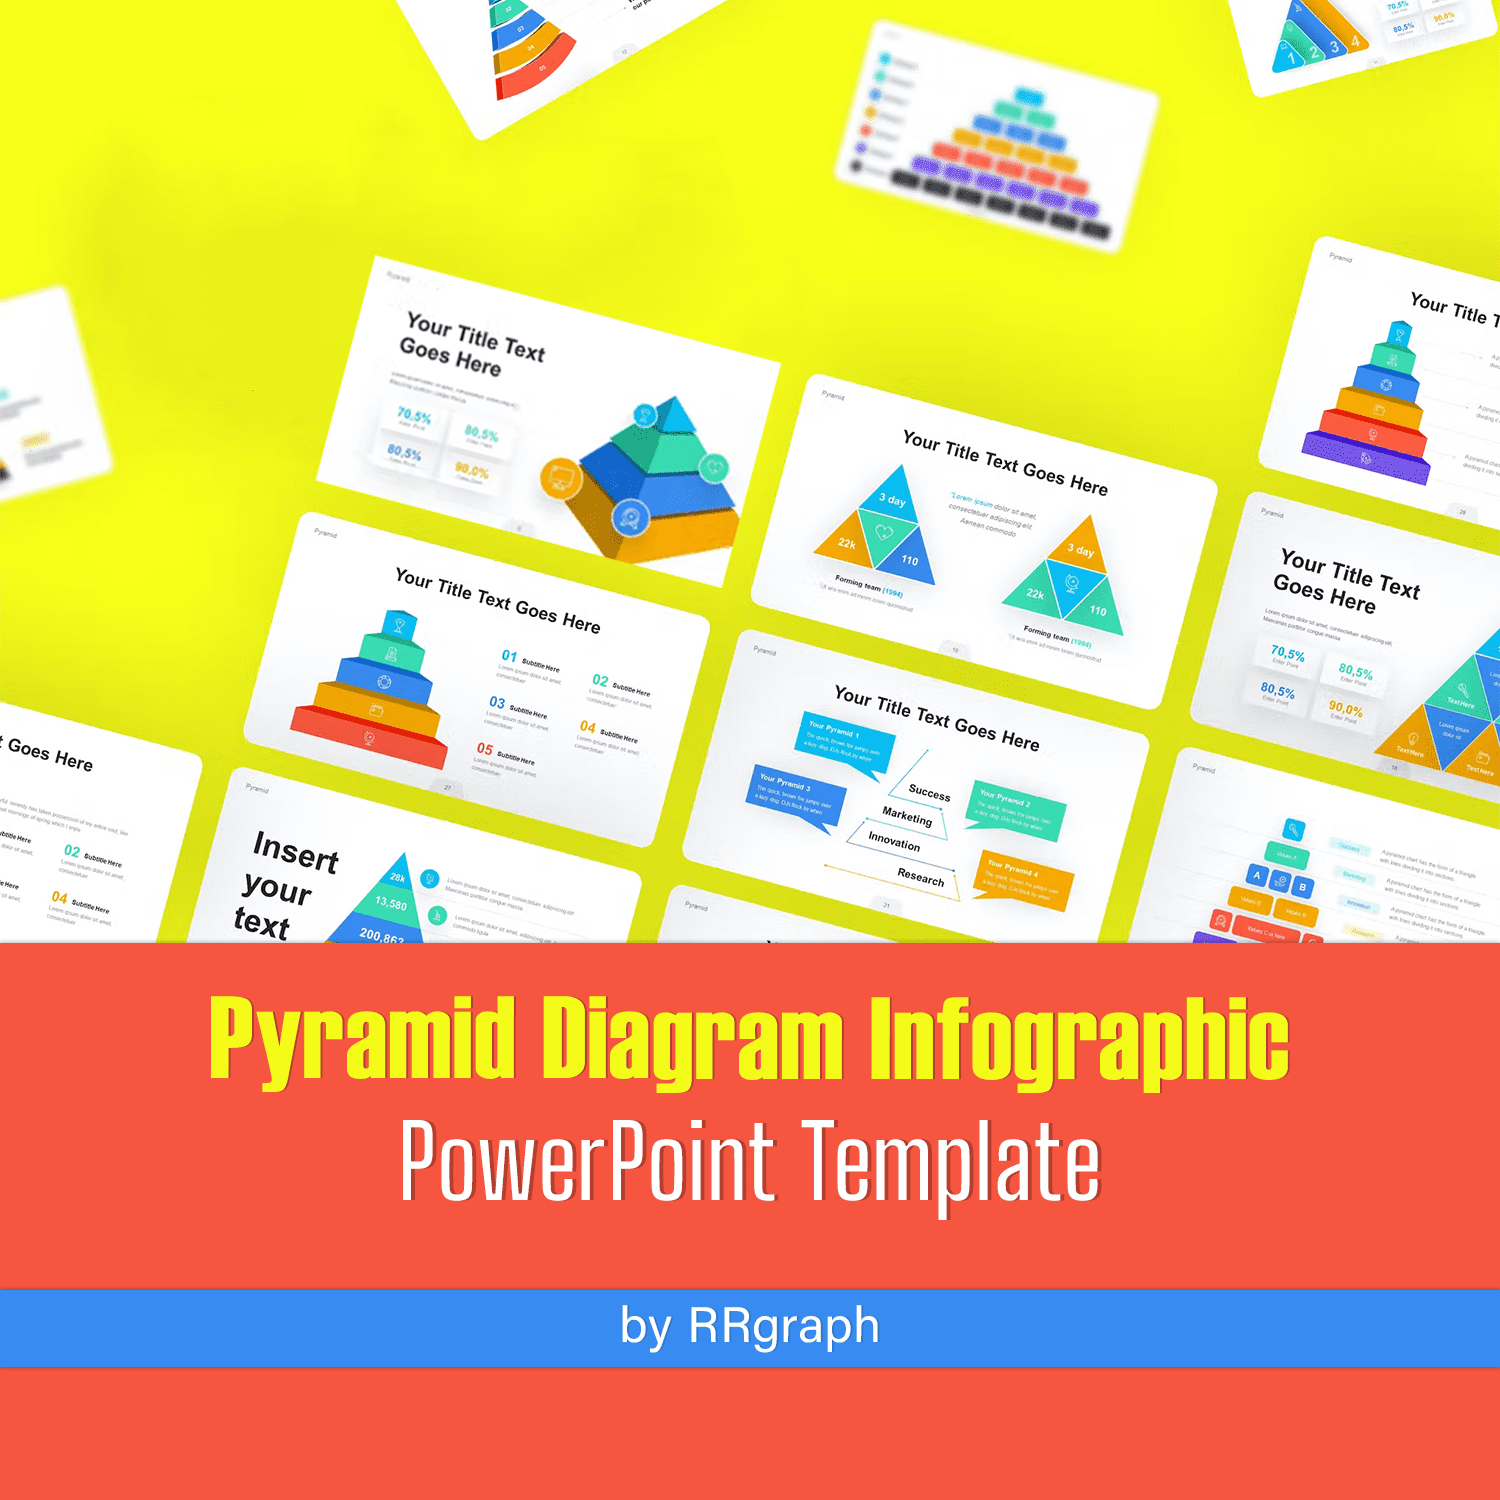 Pyramid Chart Infographic PowerPoint Template.